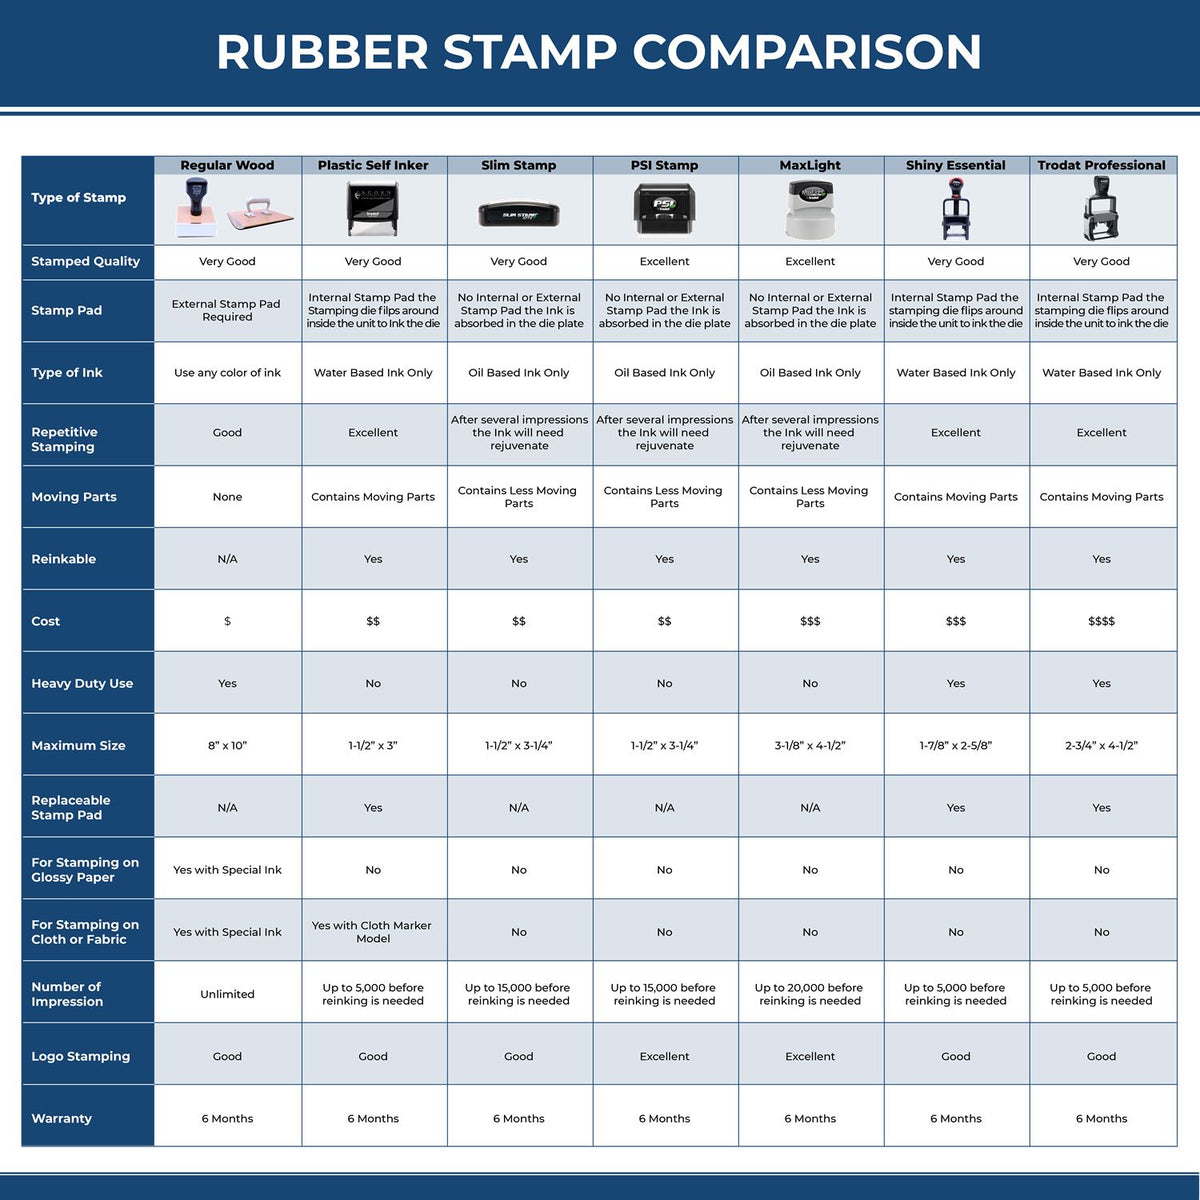 Large Times First Class Mail Rubber Stamp 4975R Rubber Stamp Comparison